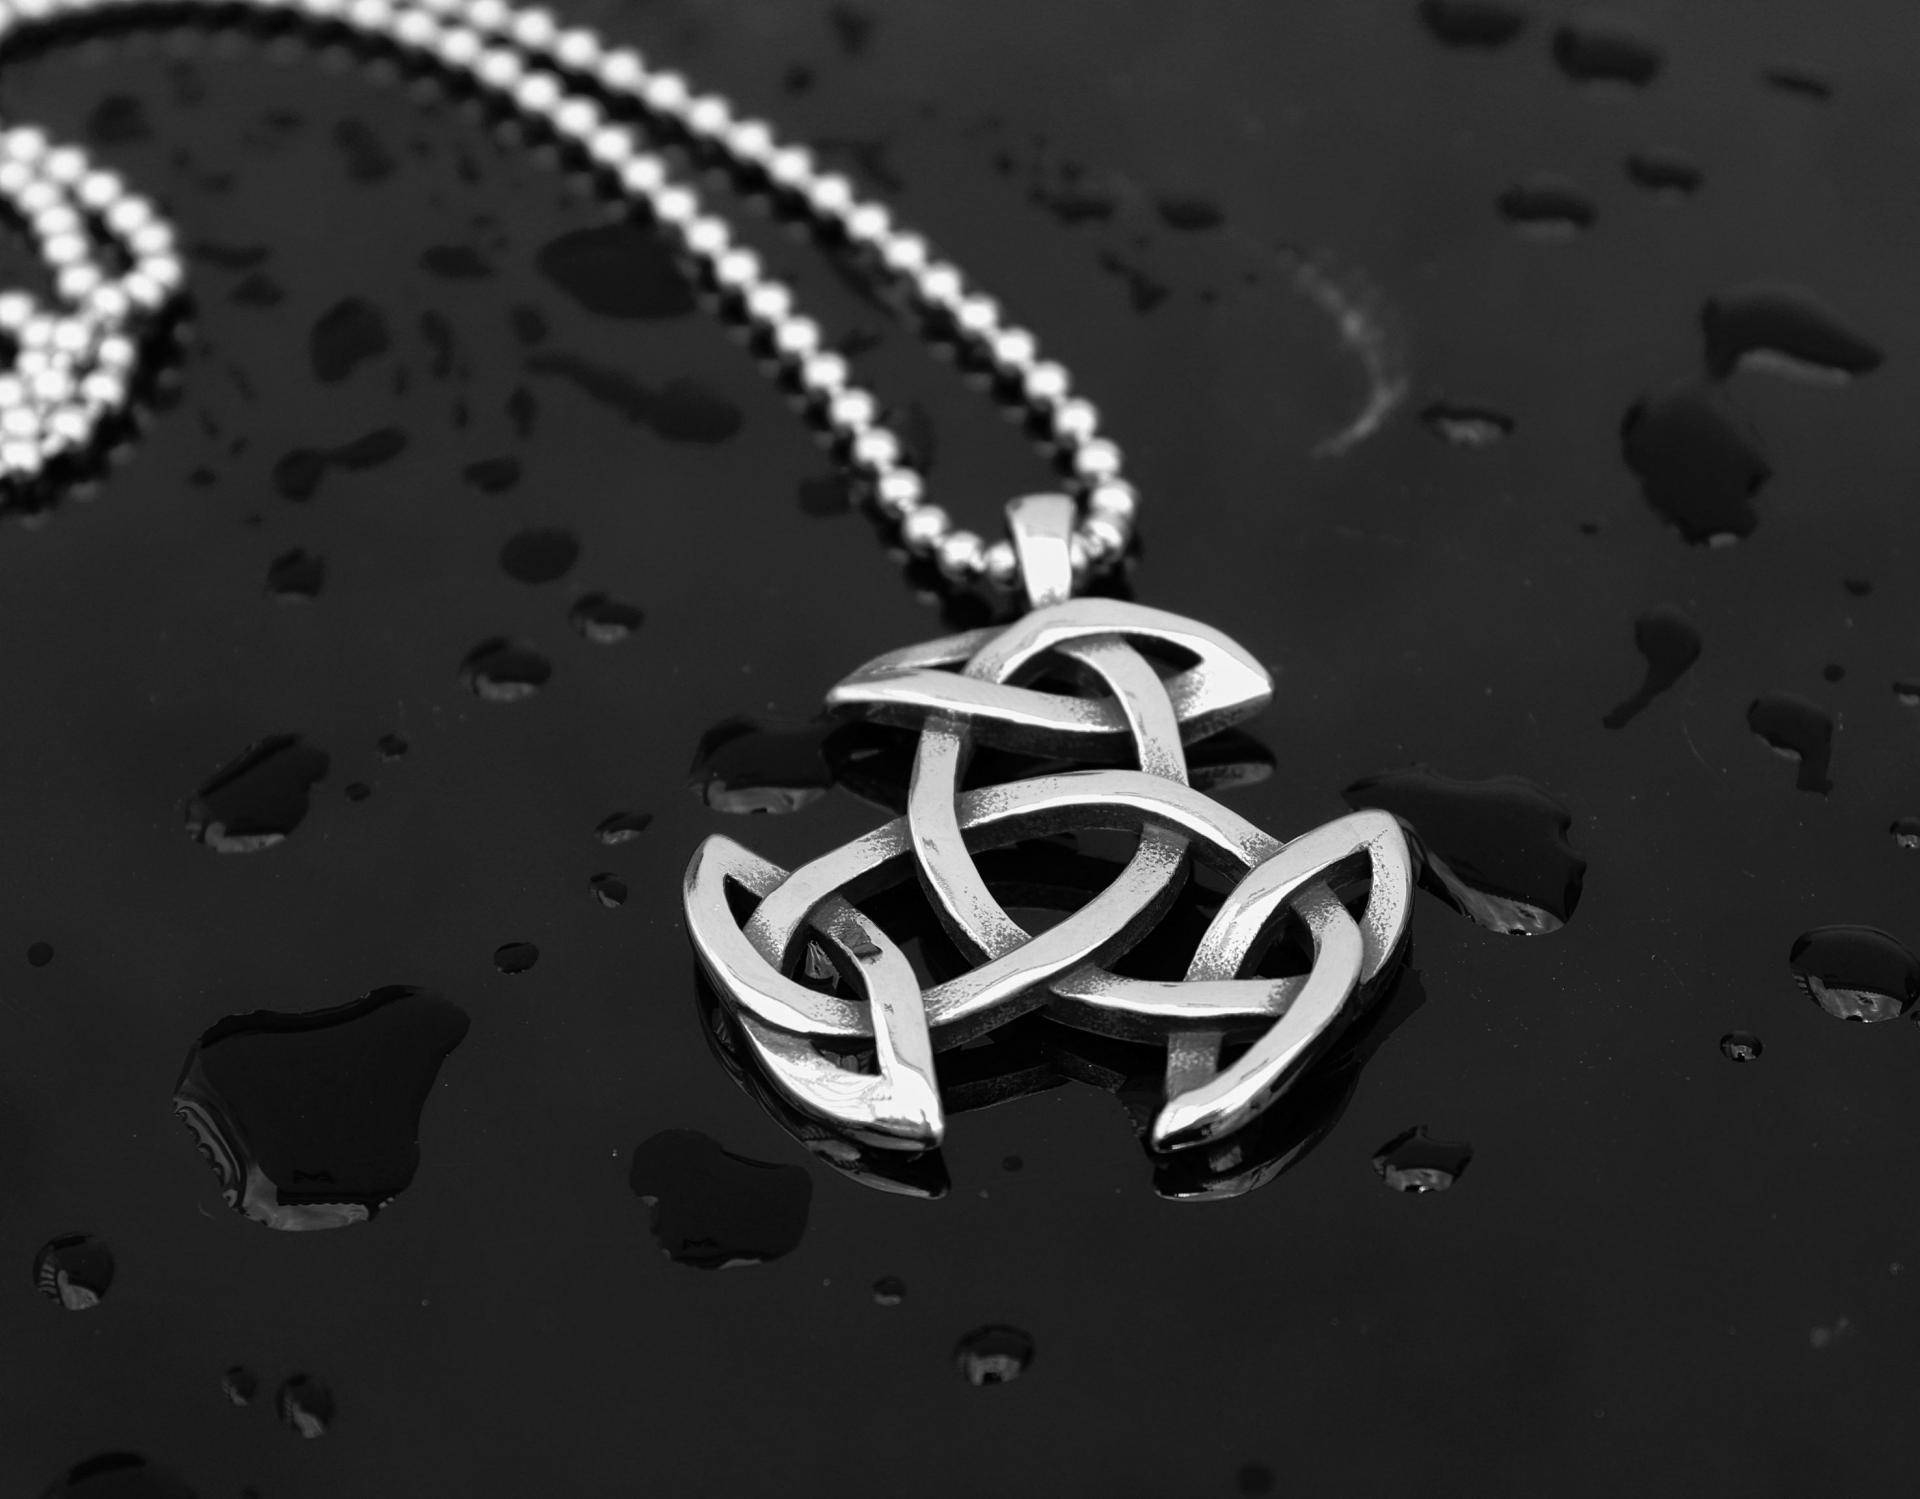 Geometric Triquetra Trinity Knot Stainless Steel Pendant